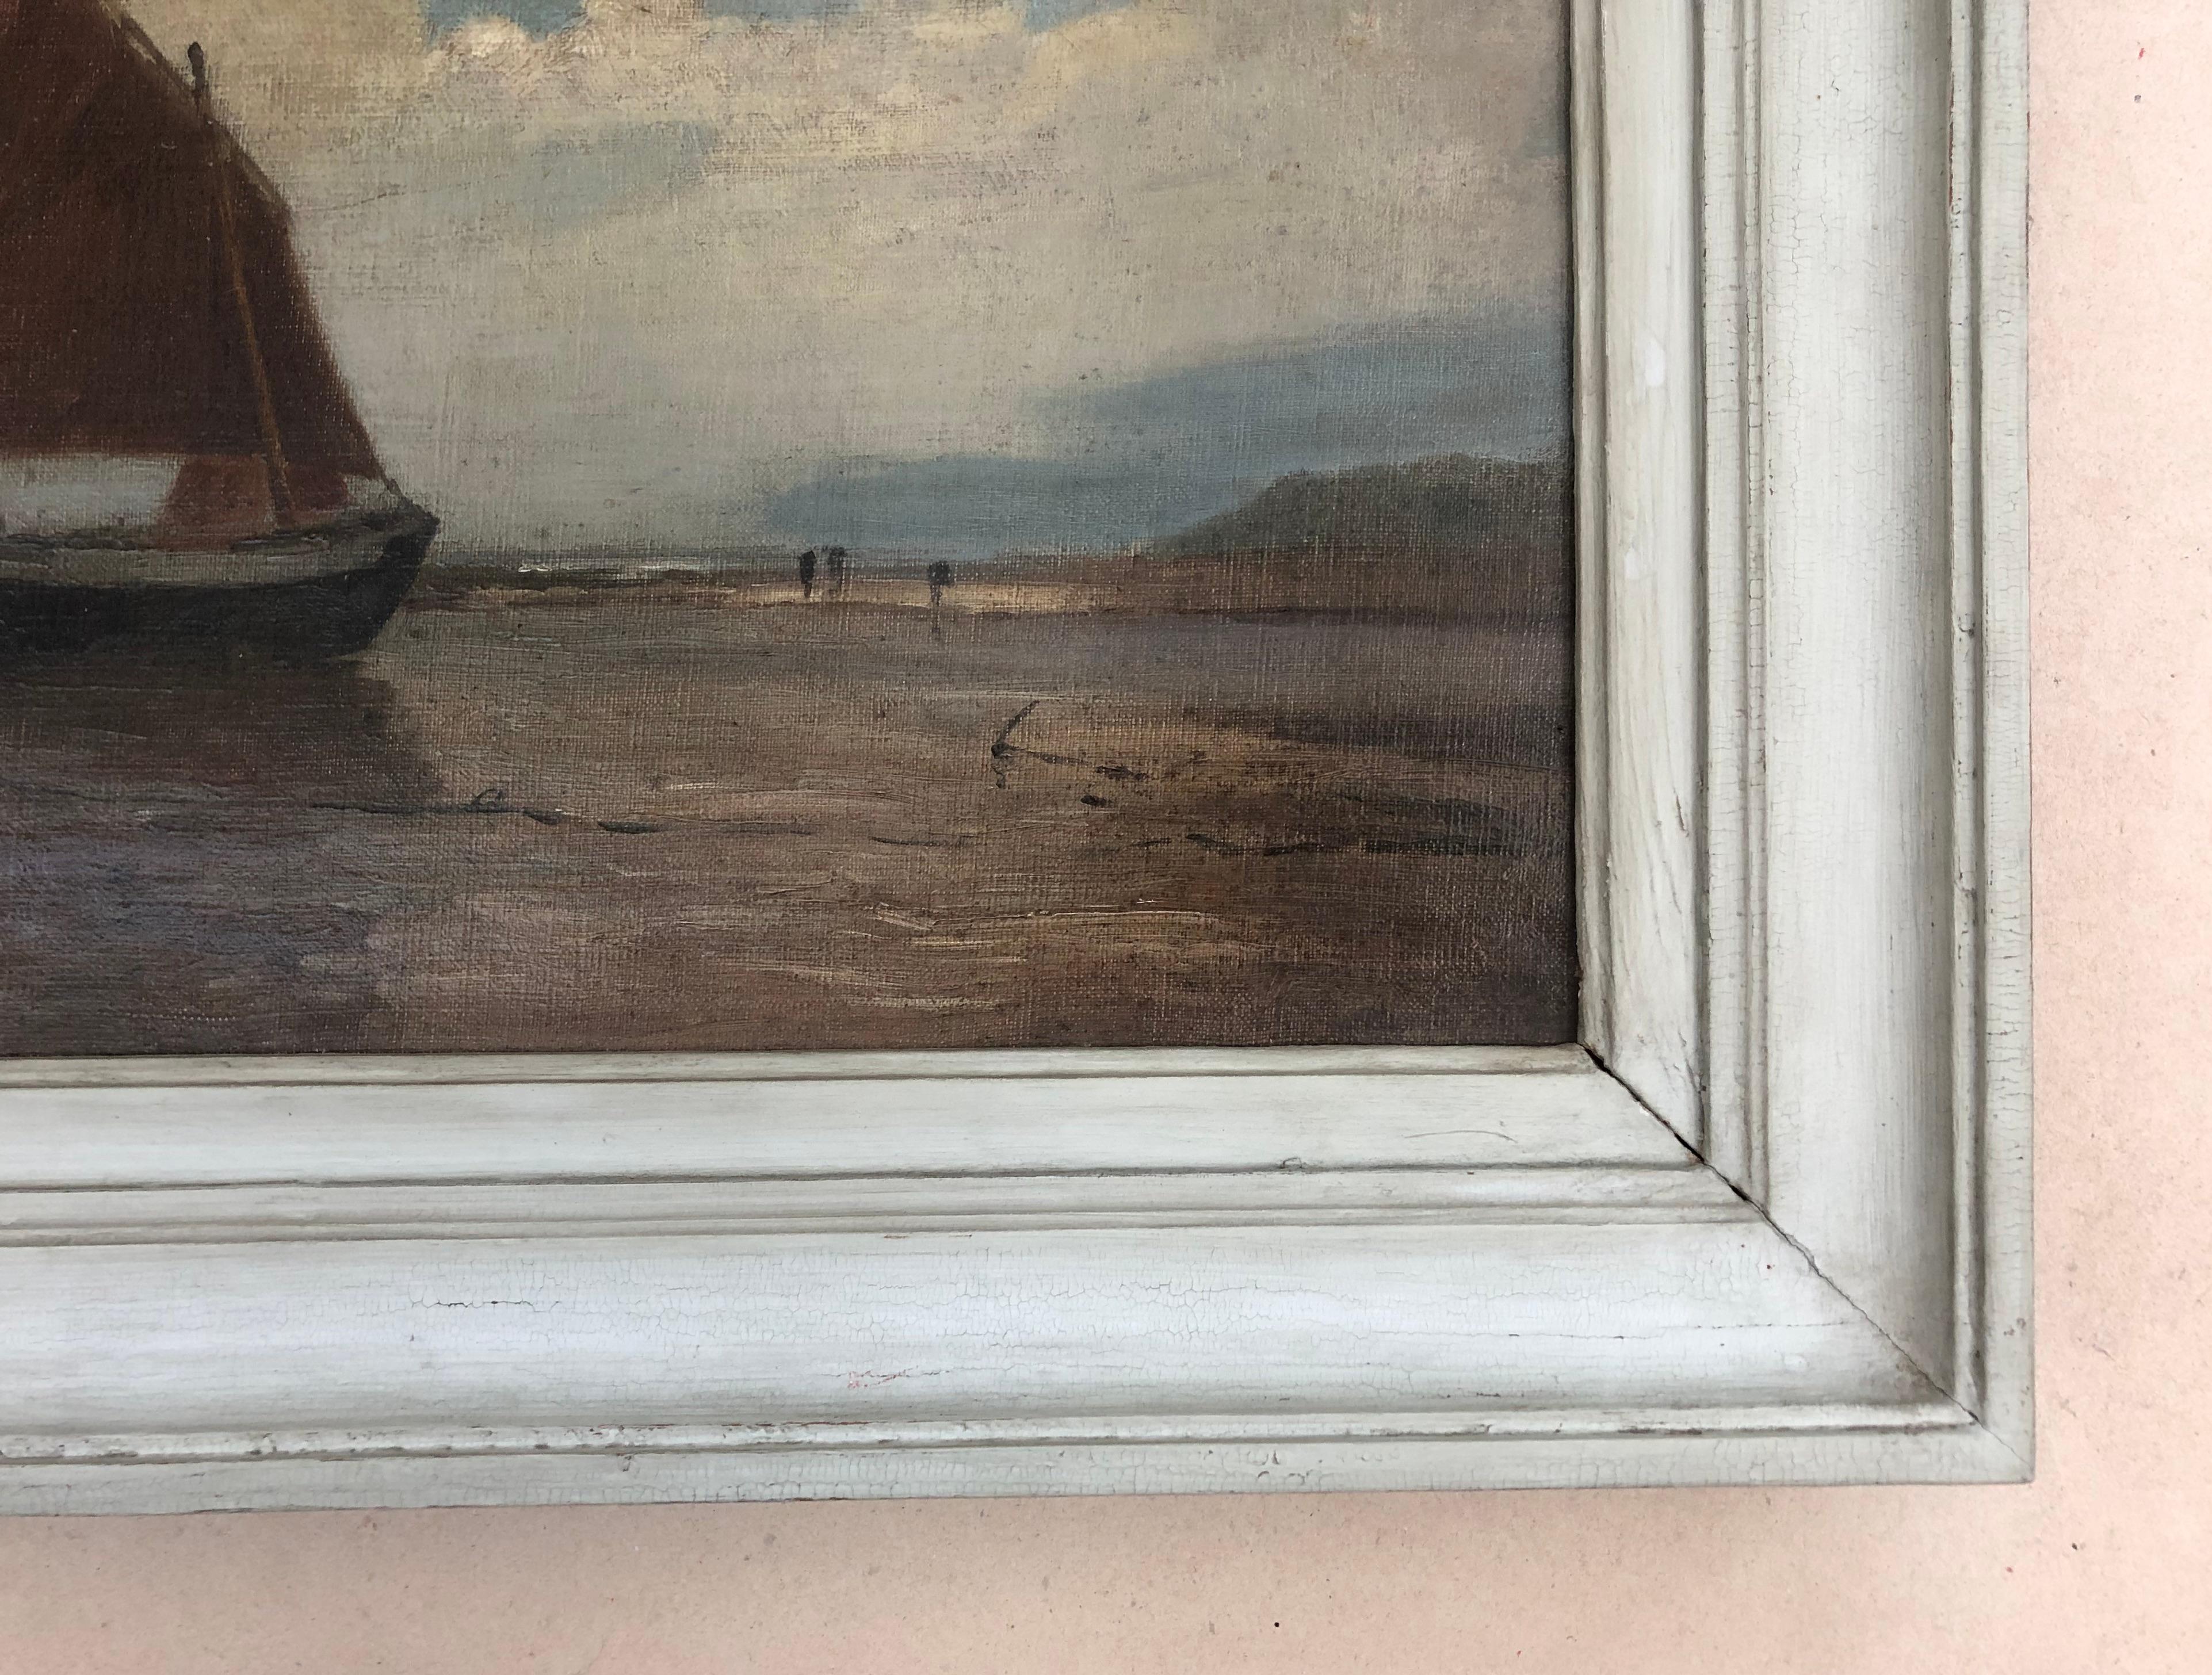 Louis Étienne TIMMERMANS (1846-1910)
Beach at low tide.
Oil on canvas signed lower left.
Slight sinking of the canvas on the left side. 
To be cleaned.
Chassis: 30 x 49 cm
Frame: 43.5 x 63 cm